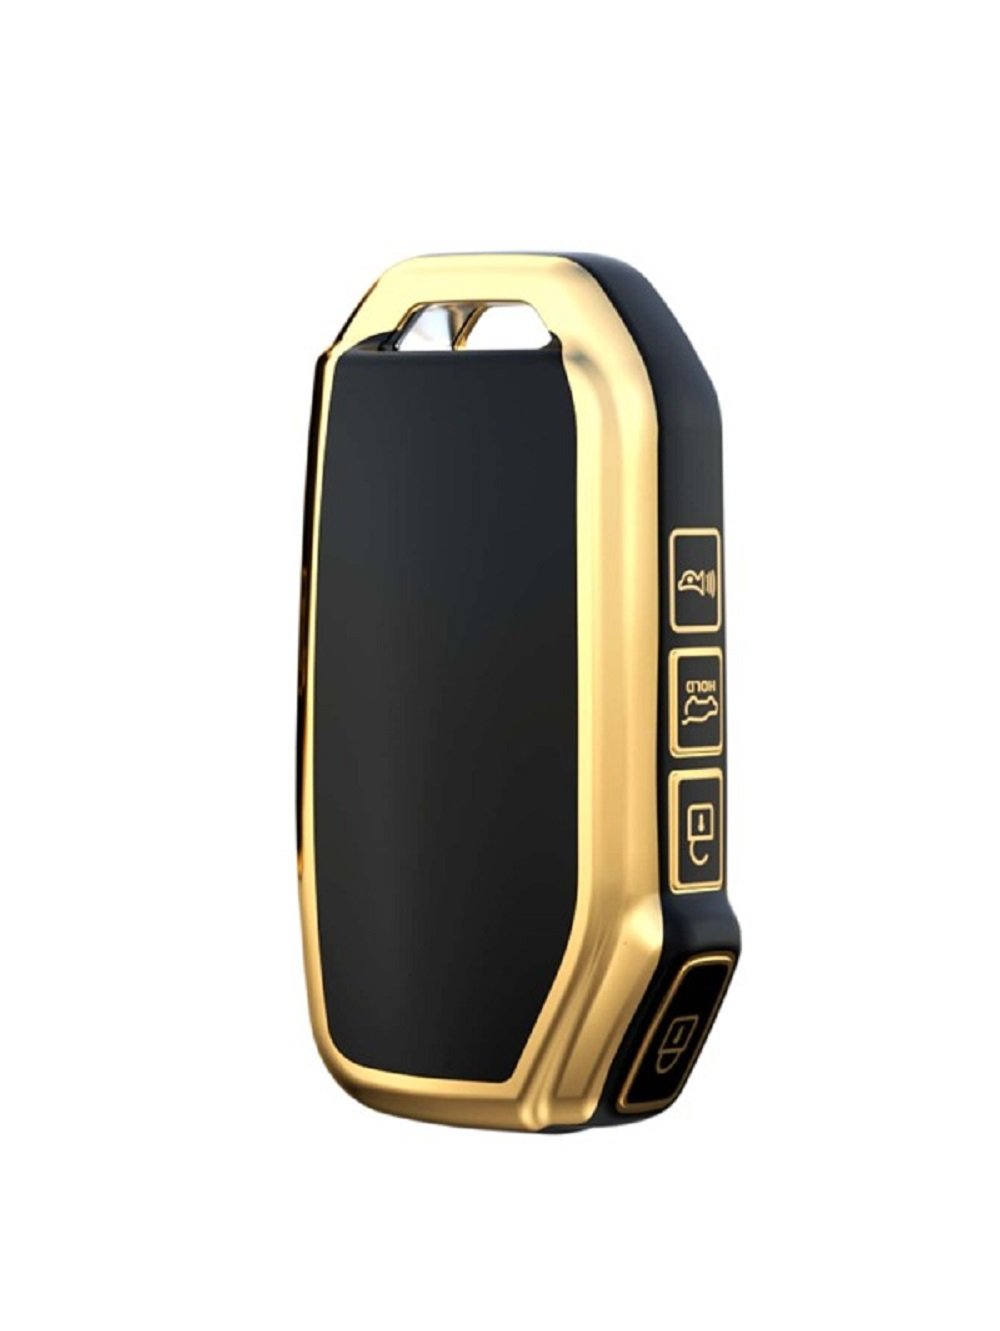 Cloudsale TPU Key Cover Compatible with Kia Seltos 2023 Facelift HTX 4 Button Smart Key (Gold/Black) Image 